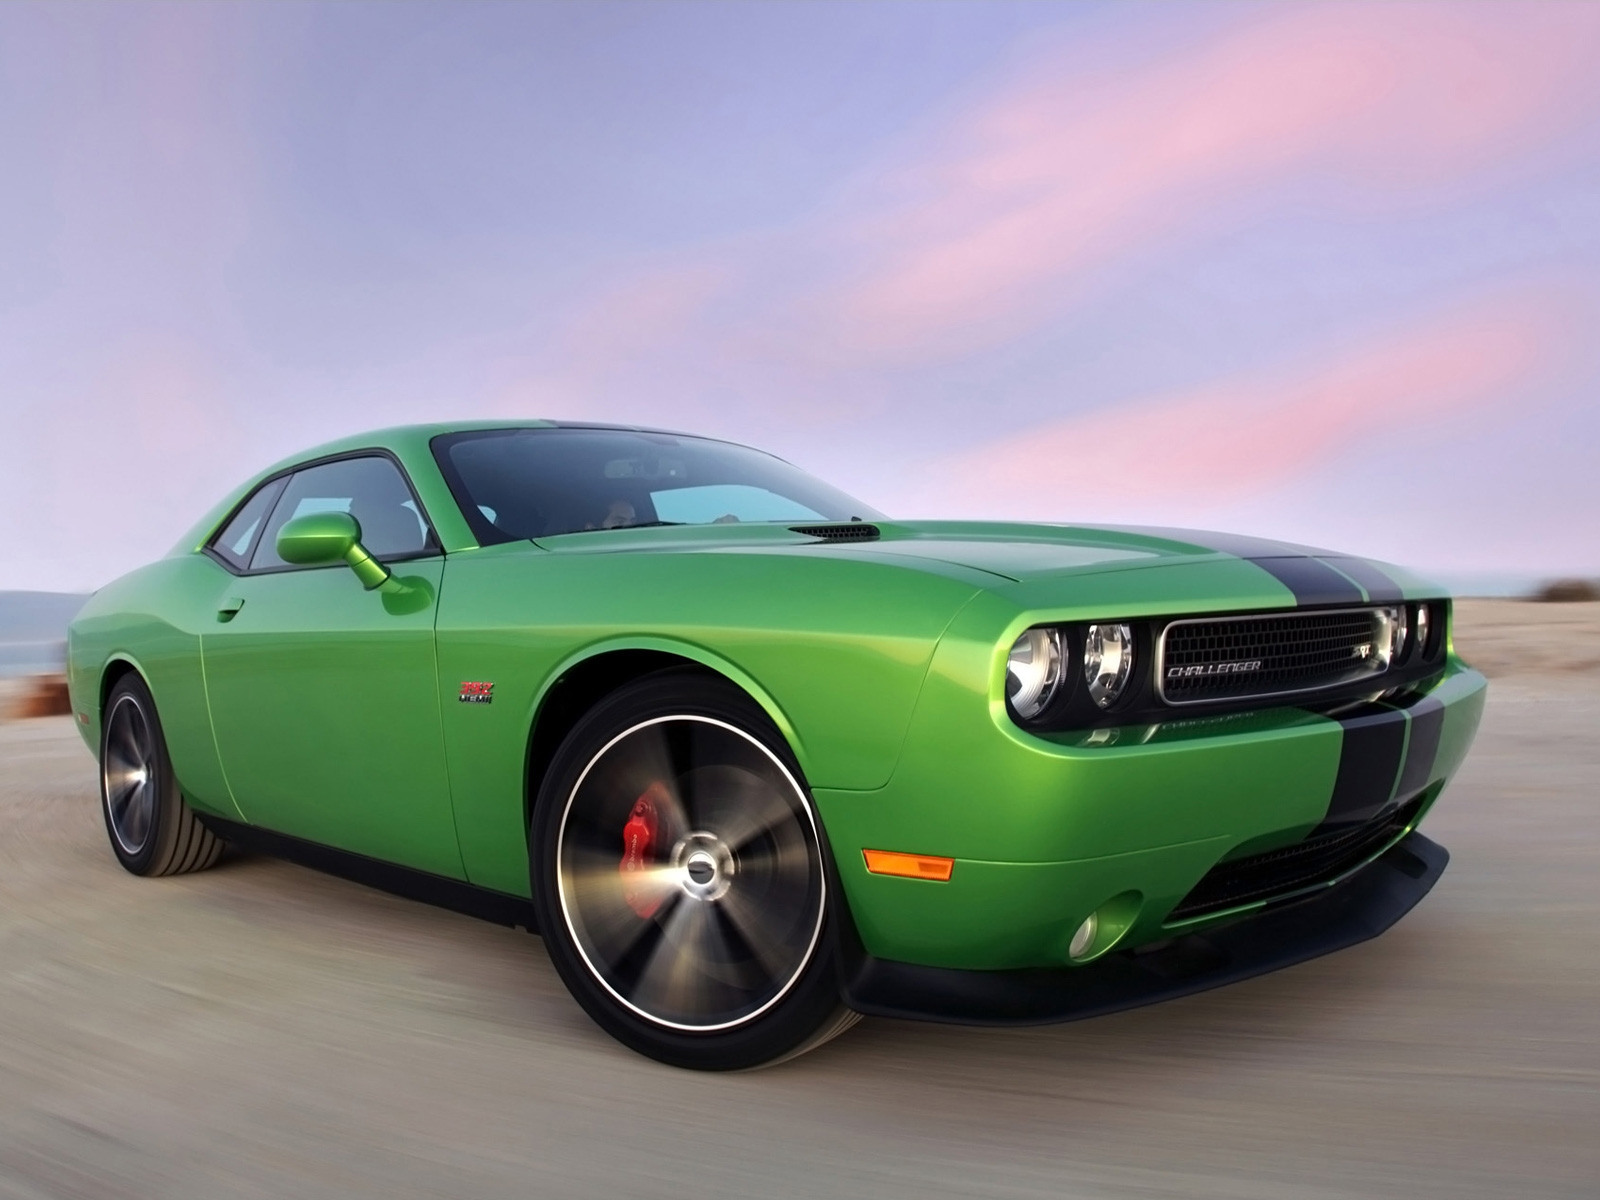 2011 Dodge Challenger Green for 1600 x 1200 resolution